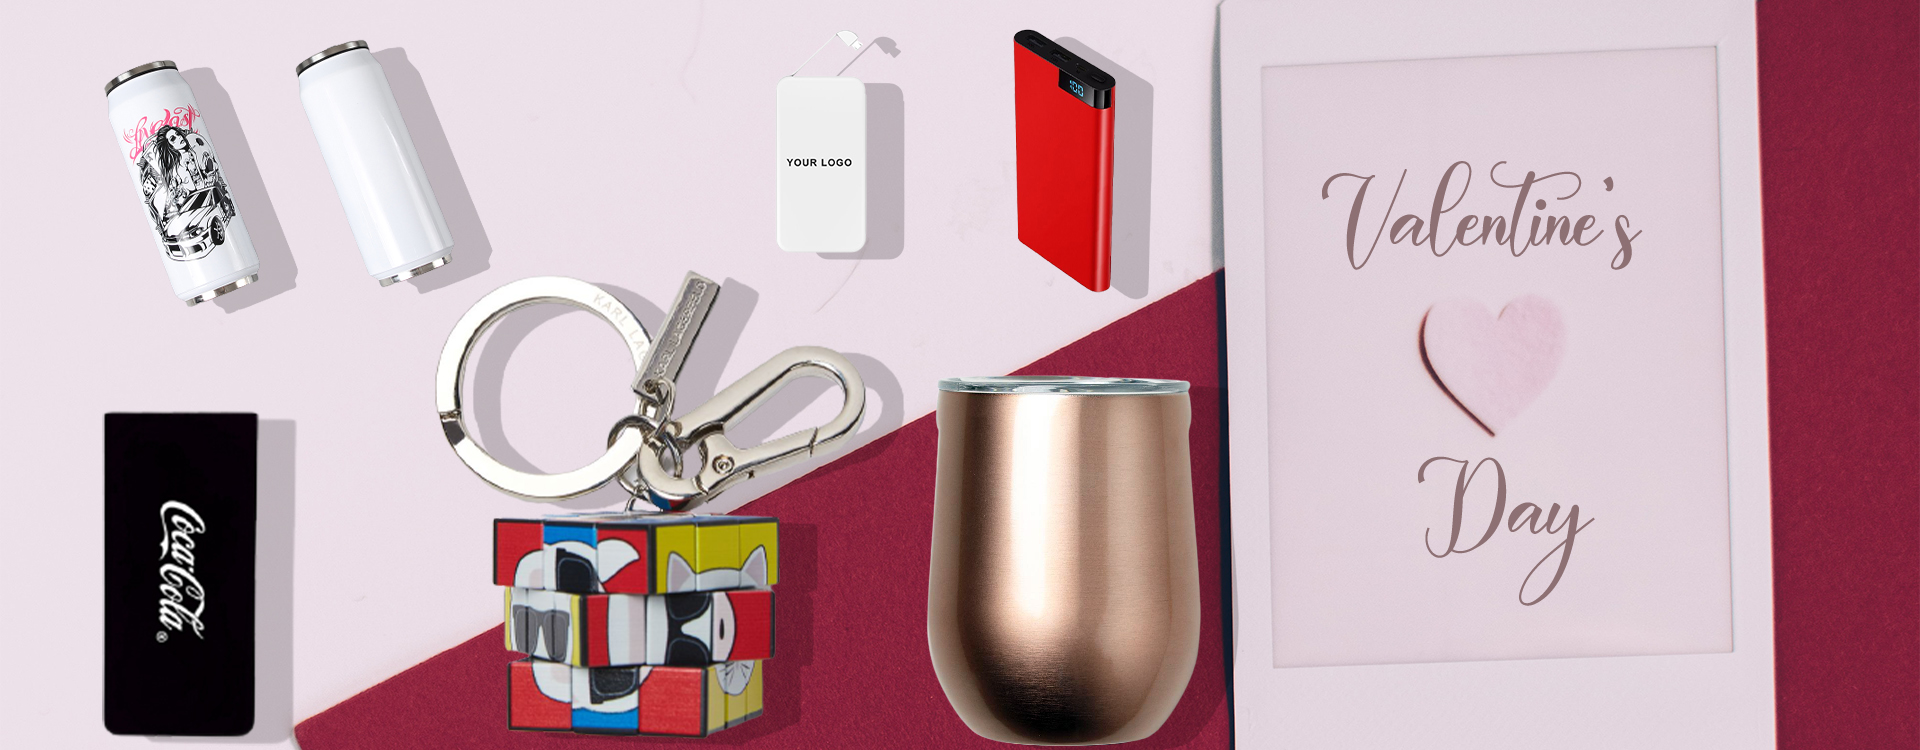 Recommendate you some Valentine’s gifts that will brighten up your Valentine's Day